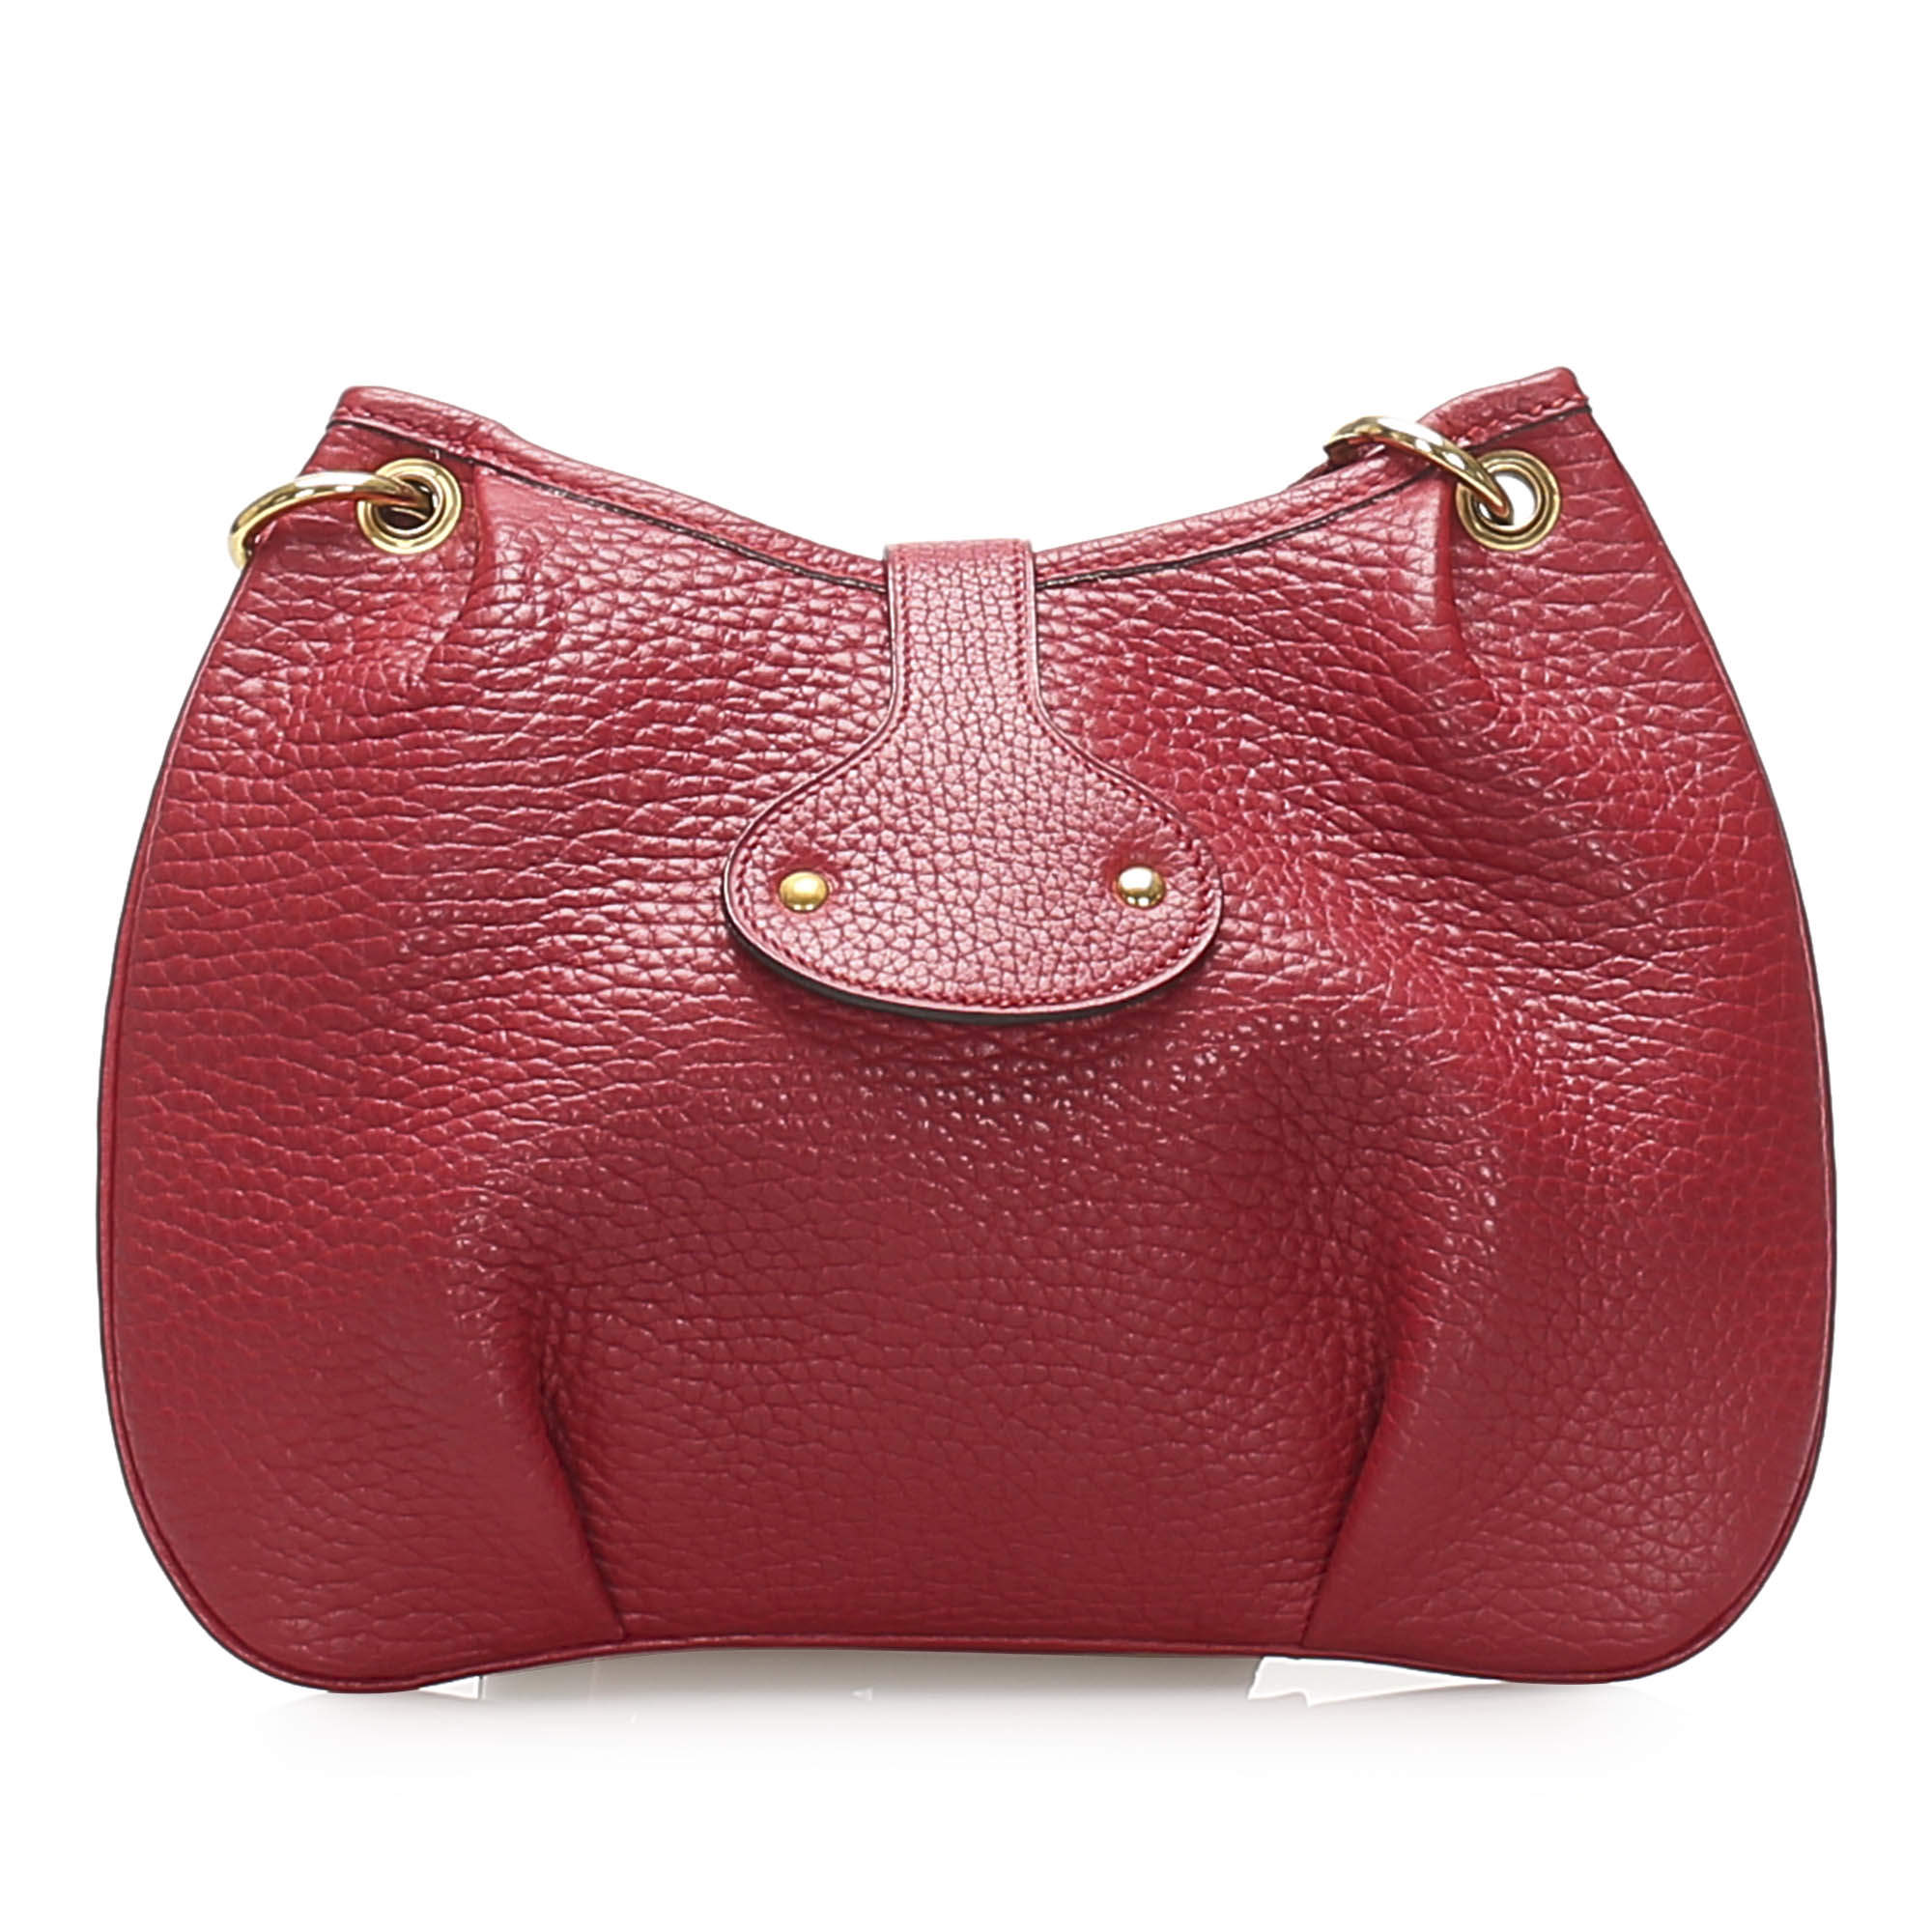 Hermes Red Leather Rodeo Bag Hermes